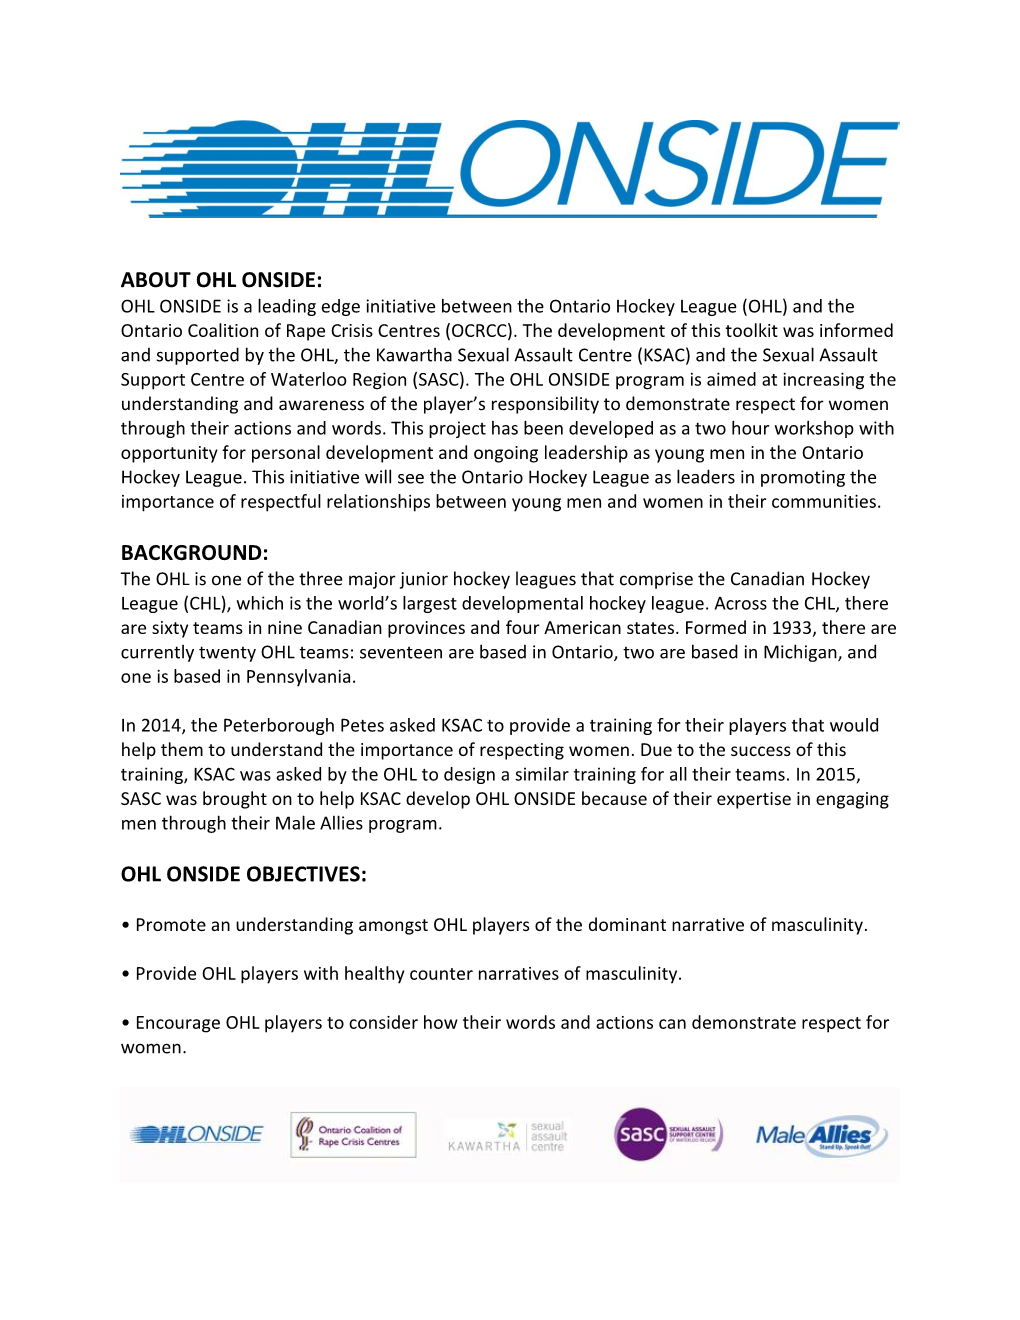 ABOUT OHL ONSIDE: OHL ONSIDE Is a Leading Edge Initiative Between the Ontario Hockey League (OHL) and the Ontario Coalition of Rape Crisis Centres (OCRCC)